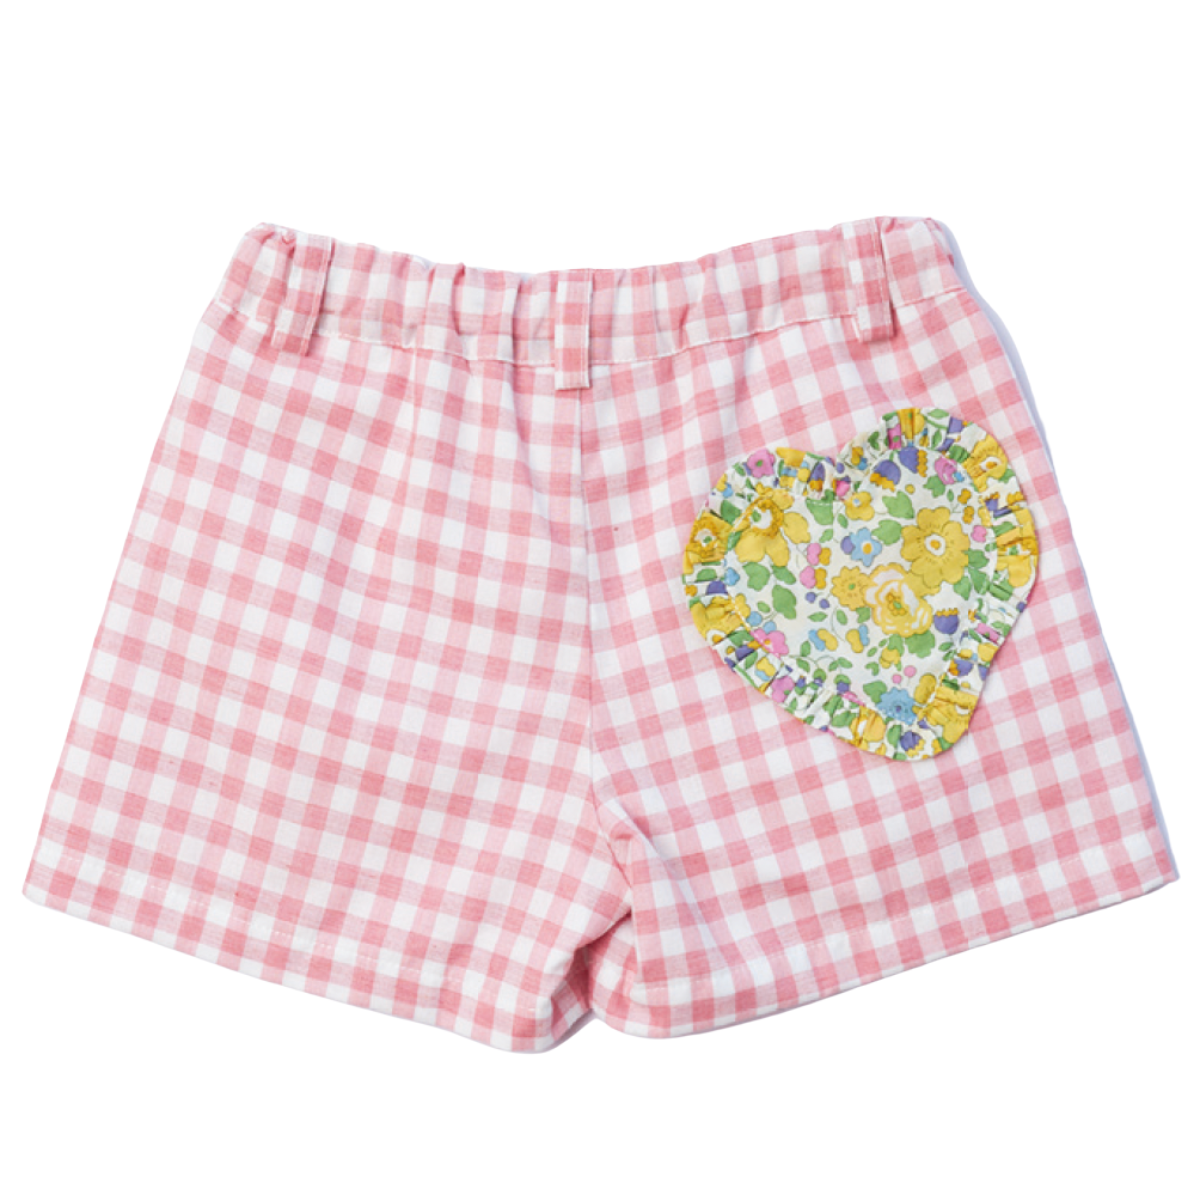 Pink gingham shorts with yellow floral heart pocket by Sal and Pimenta. 